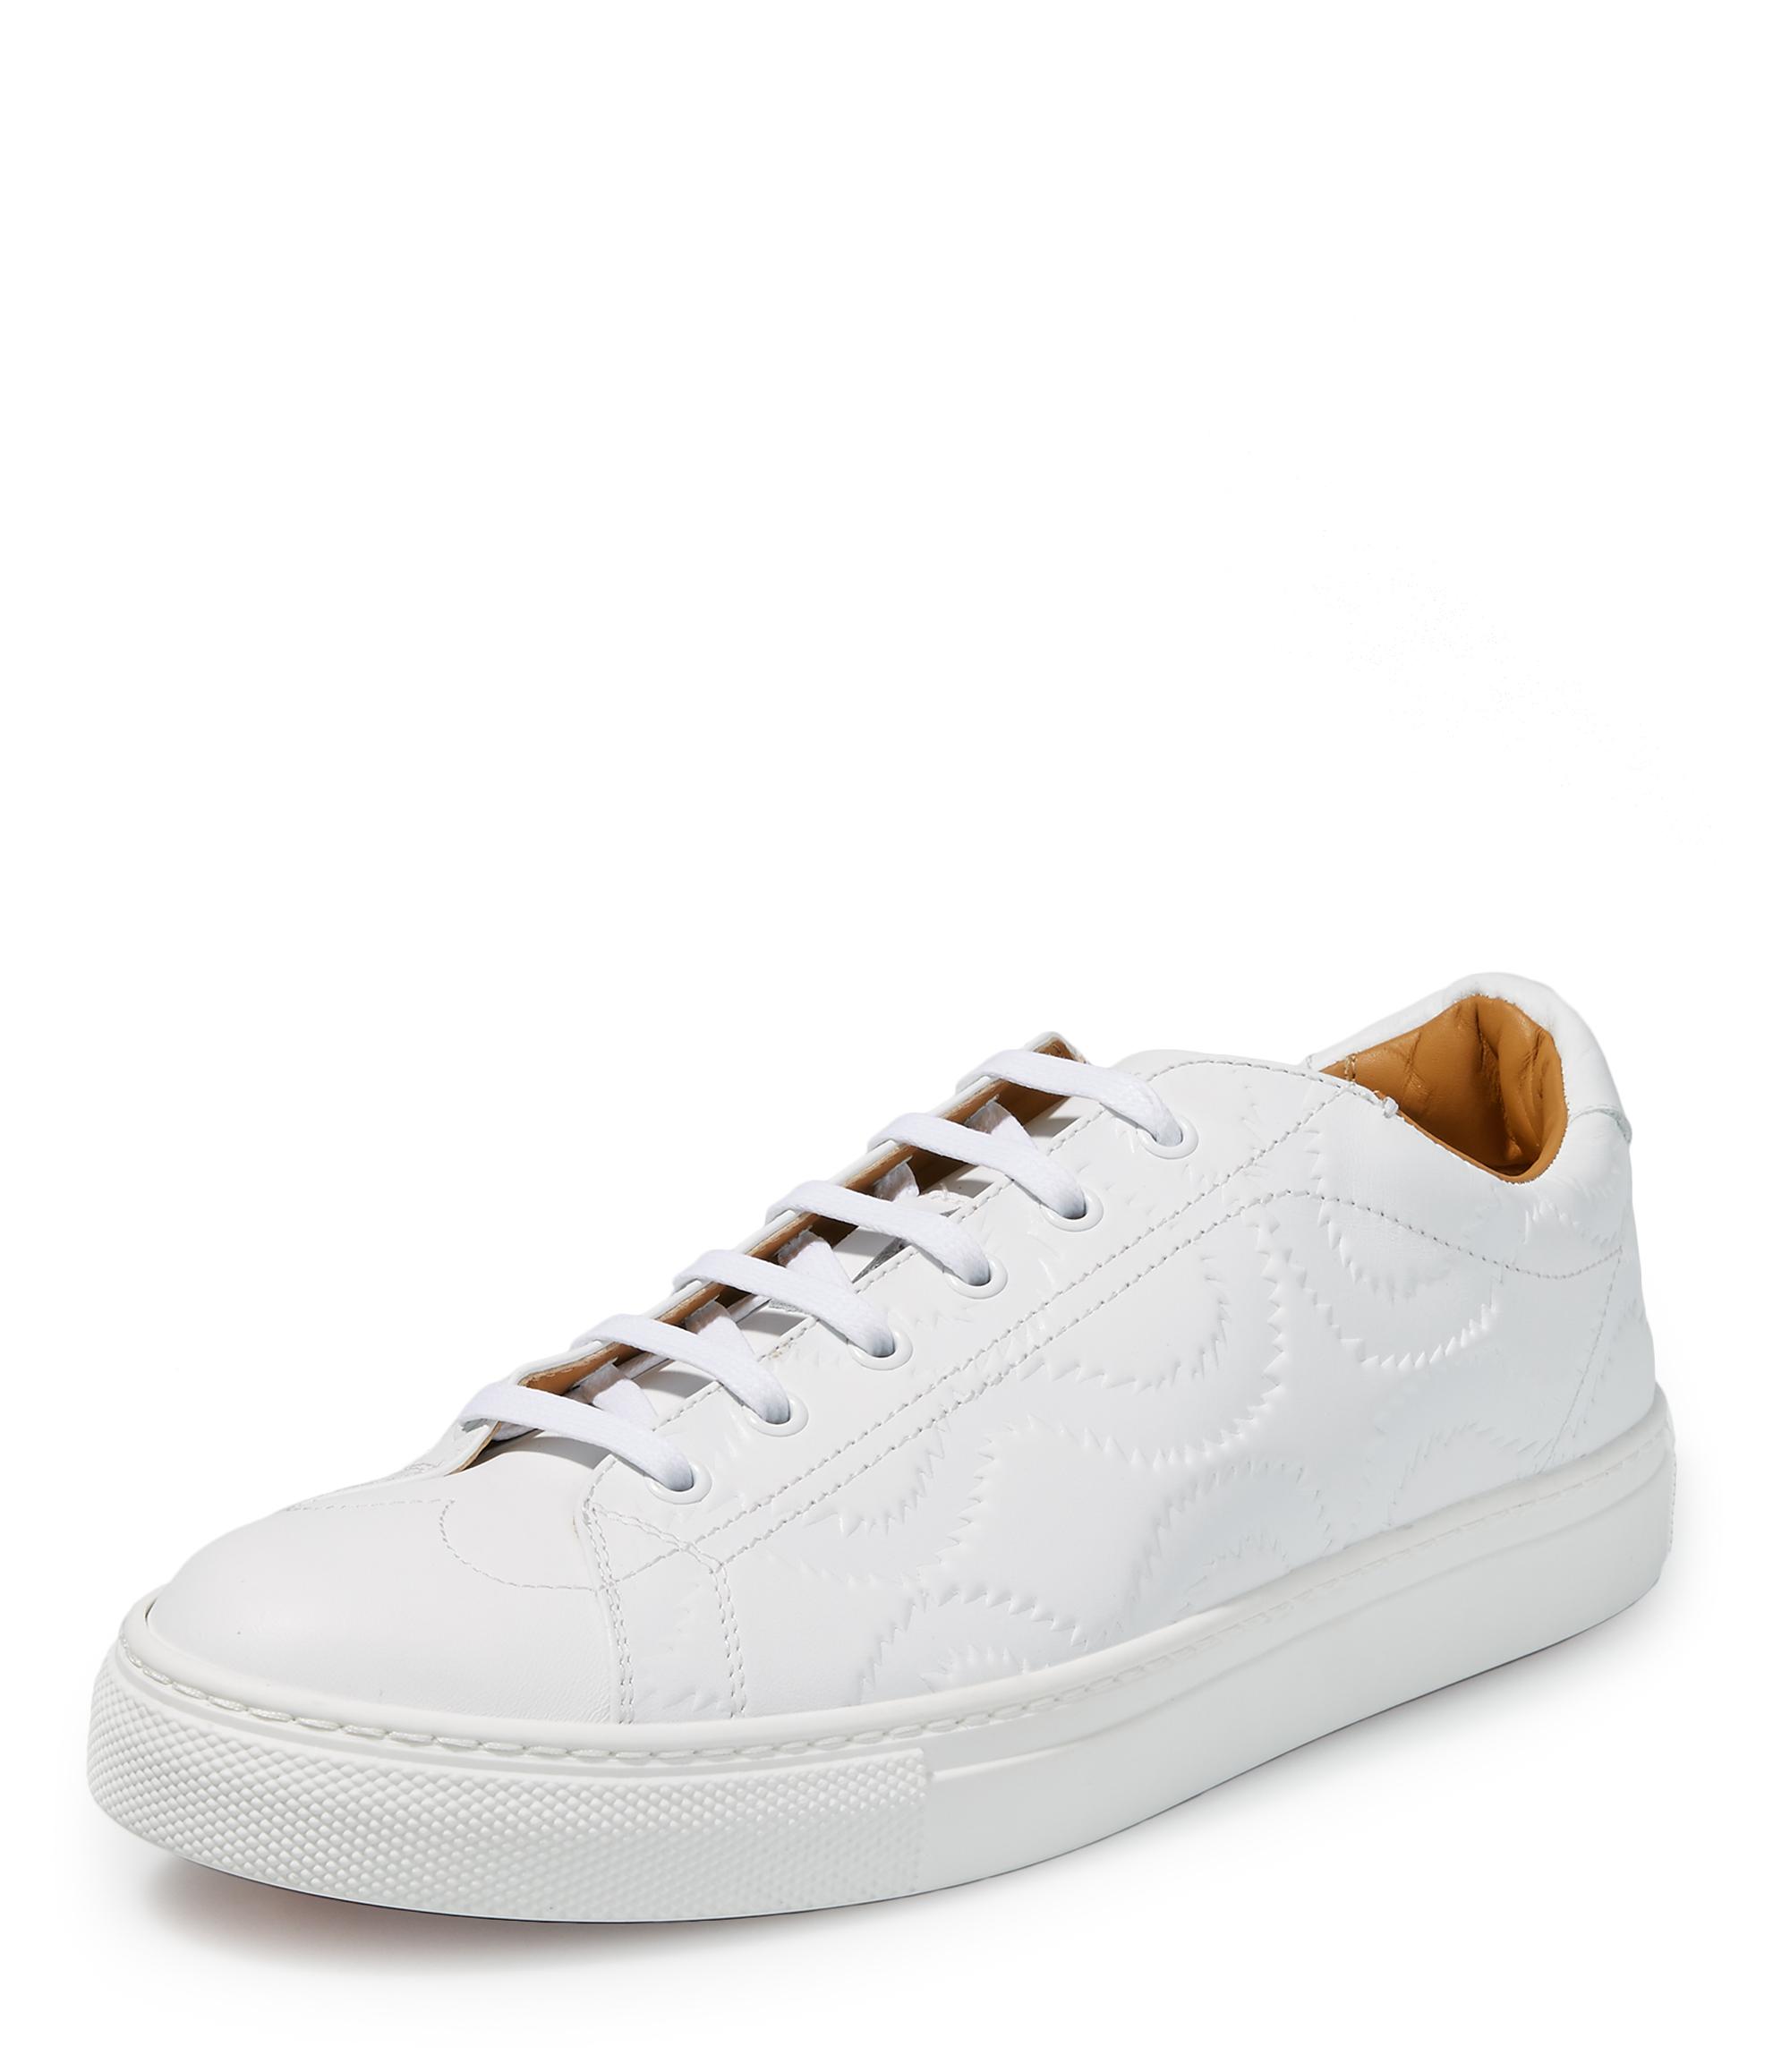 Lyst - Vivienne Westwood Derby Trainers White in White for Men